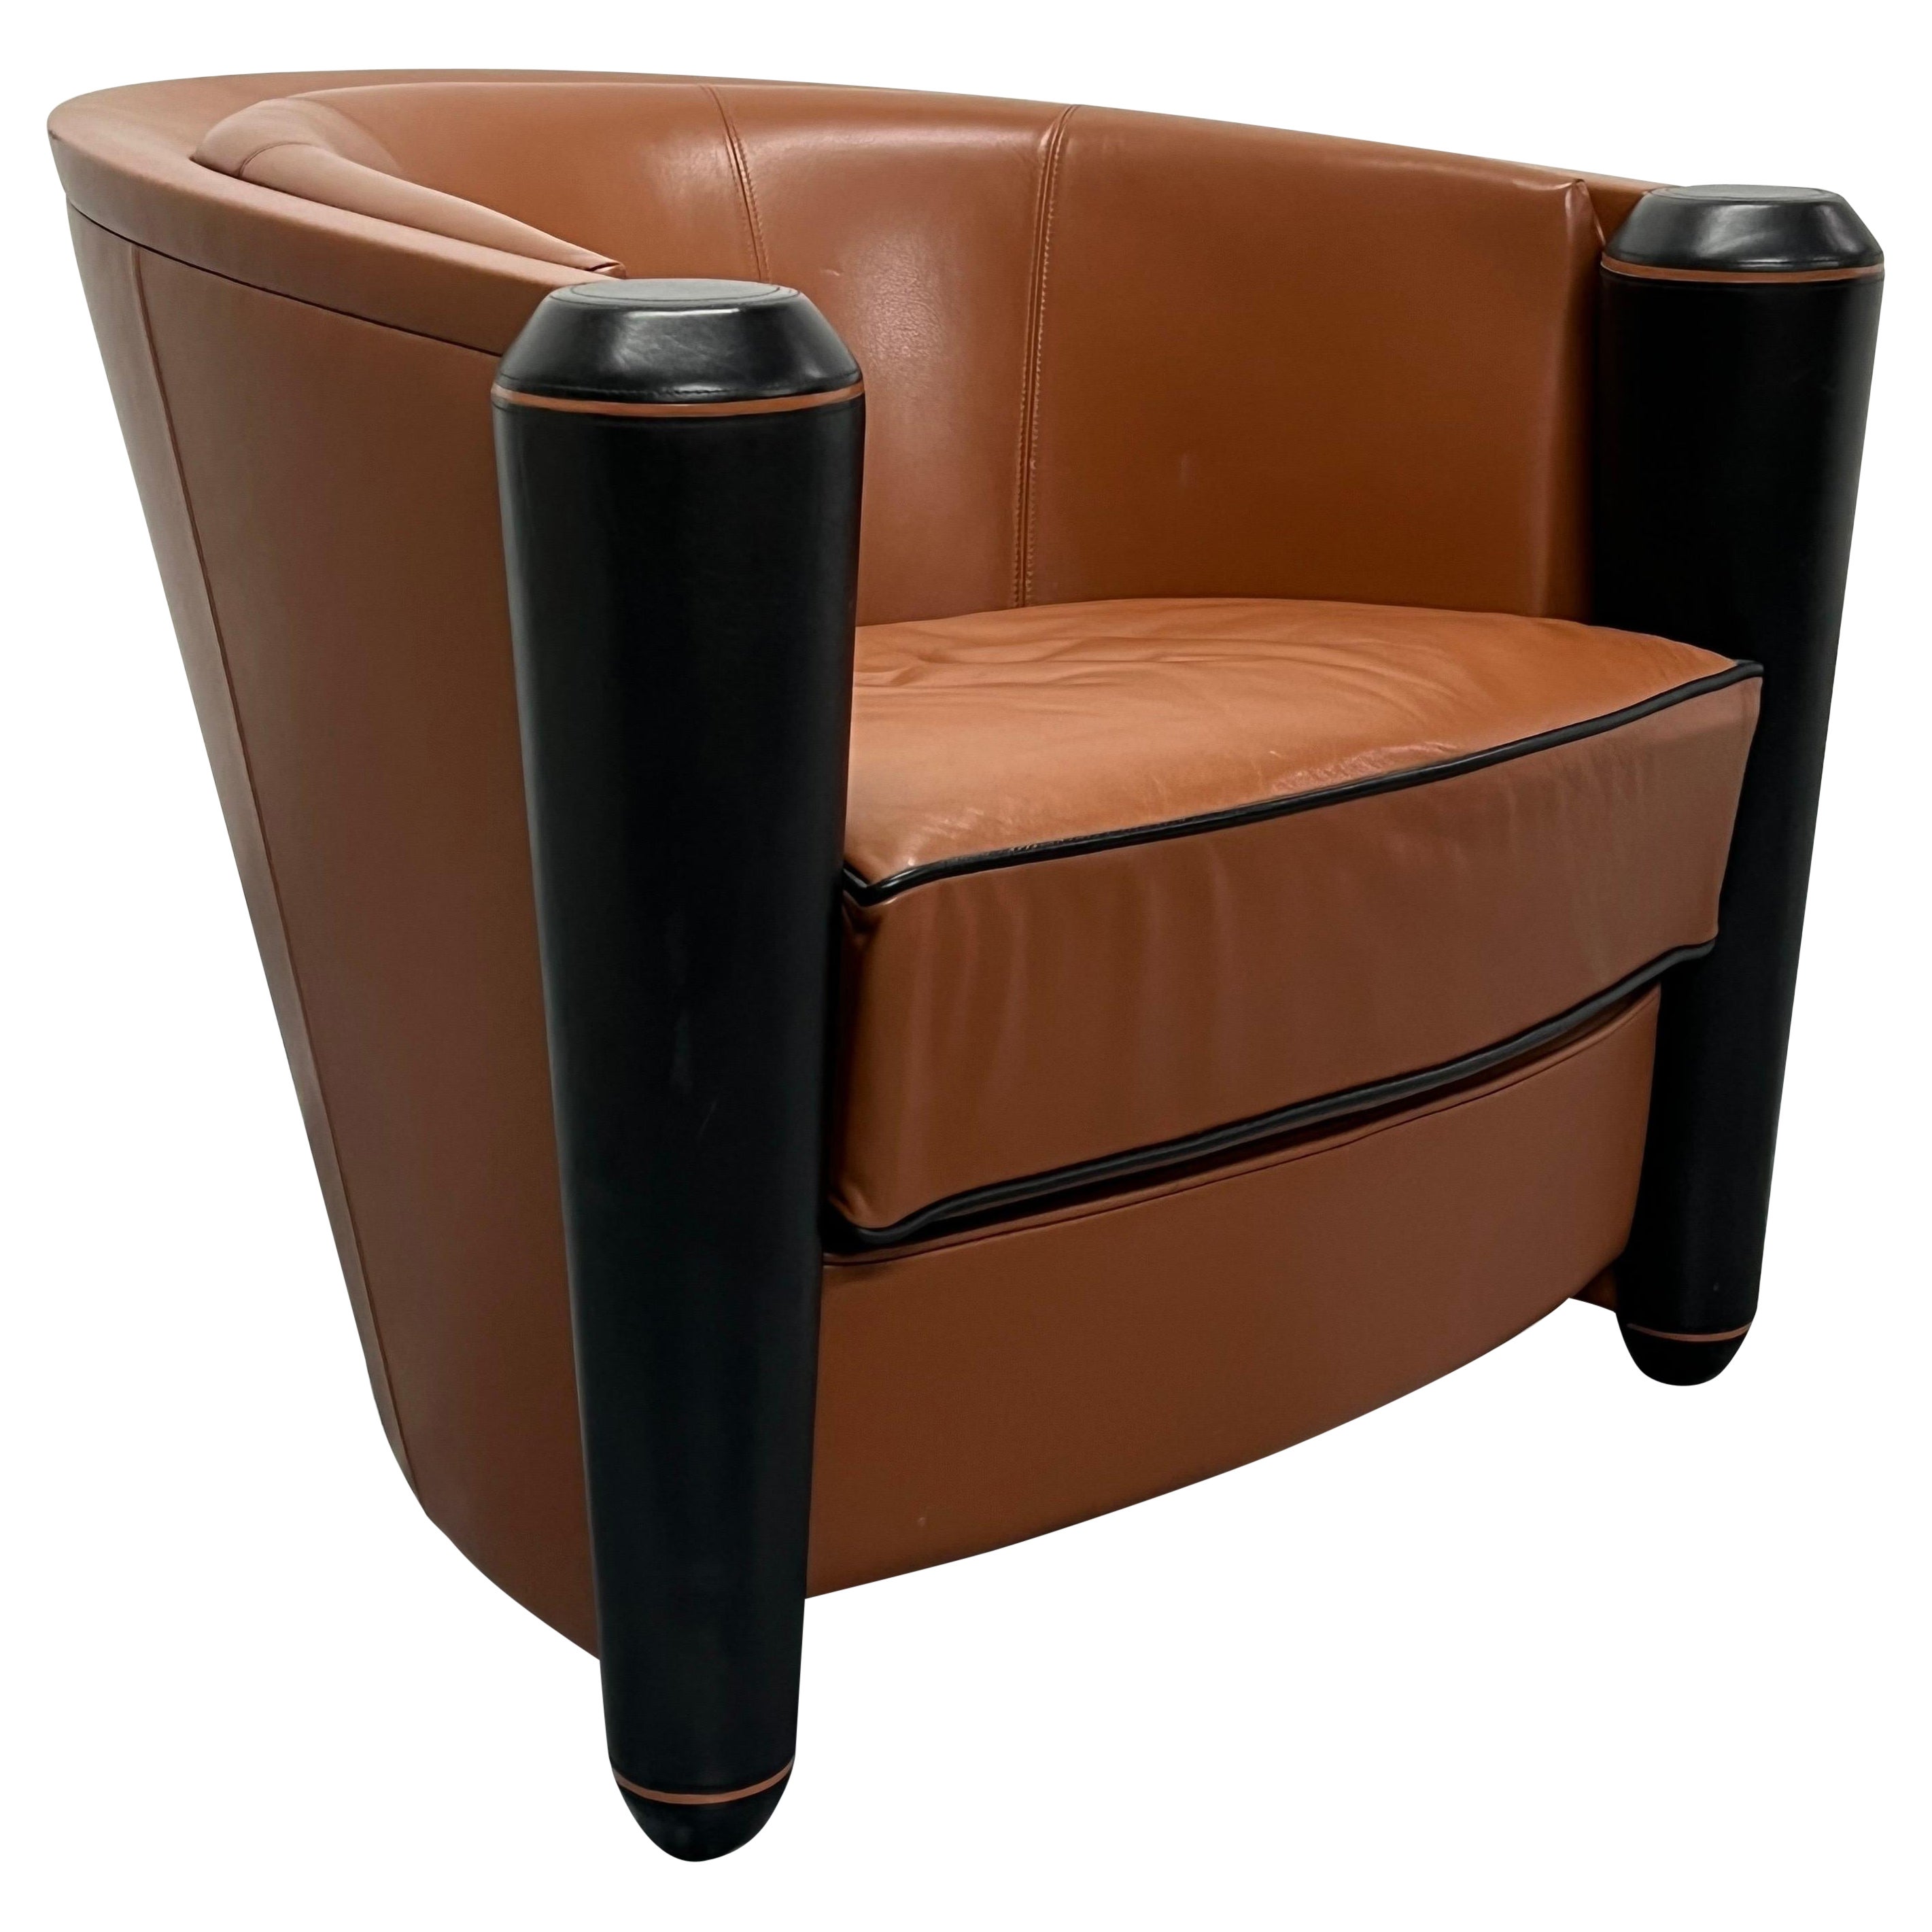 Adam Tihany i4 Mariani "Marnie" Leather Club Chair for Pace Collection, 1980s